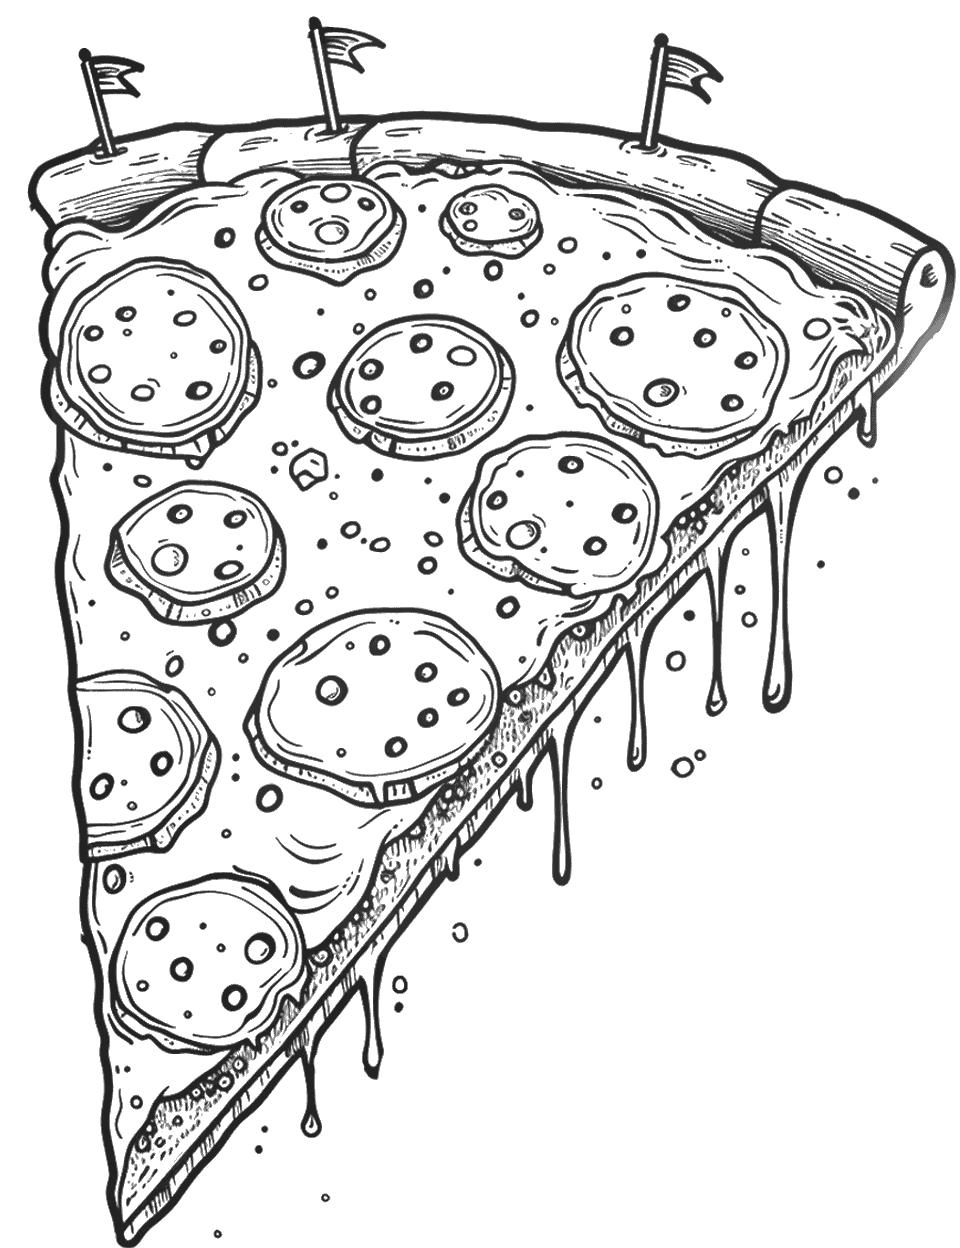 Cheese Drip Pizza Coloring Page - A slice of pizza with so much cheese that its dripping with little flags on top.